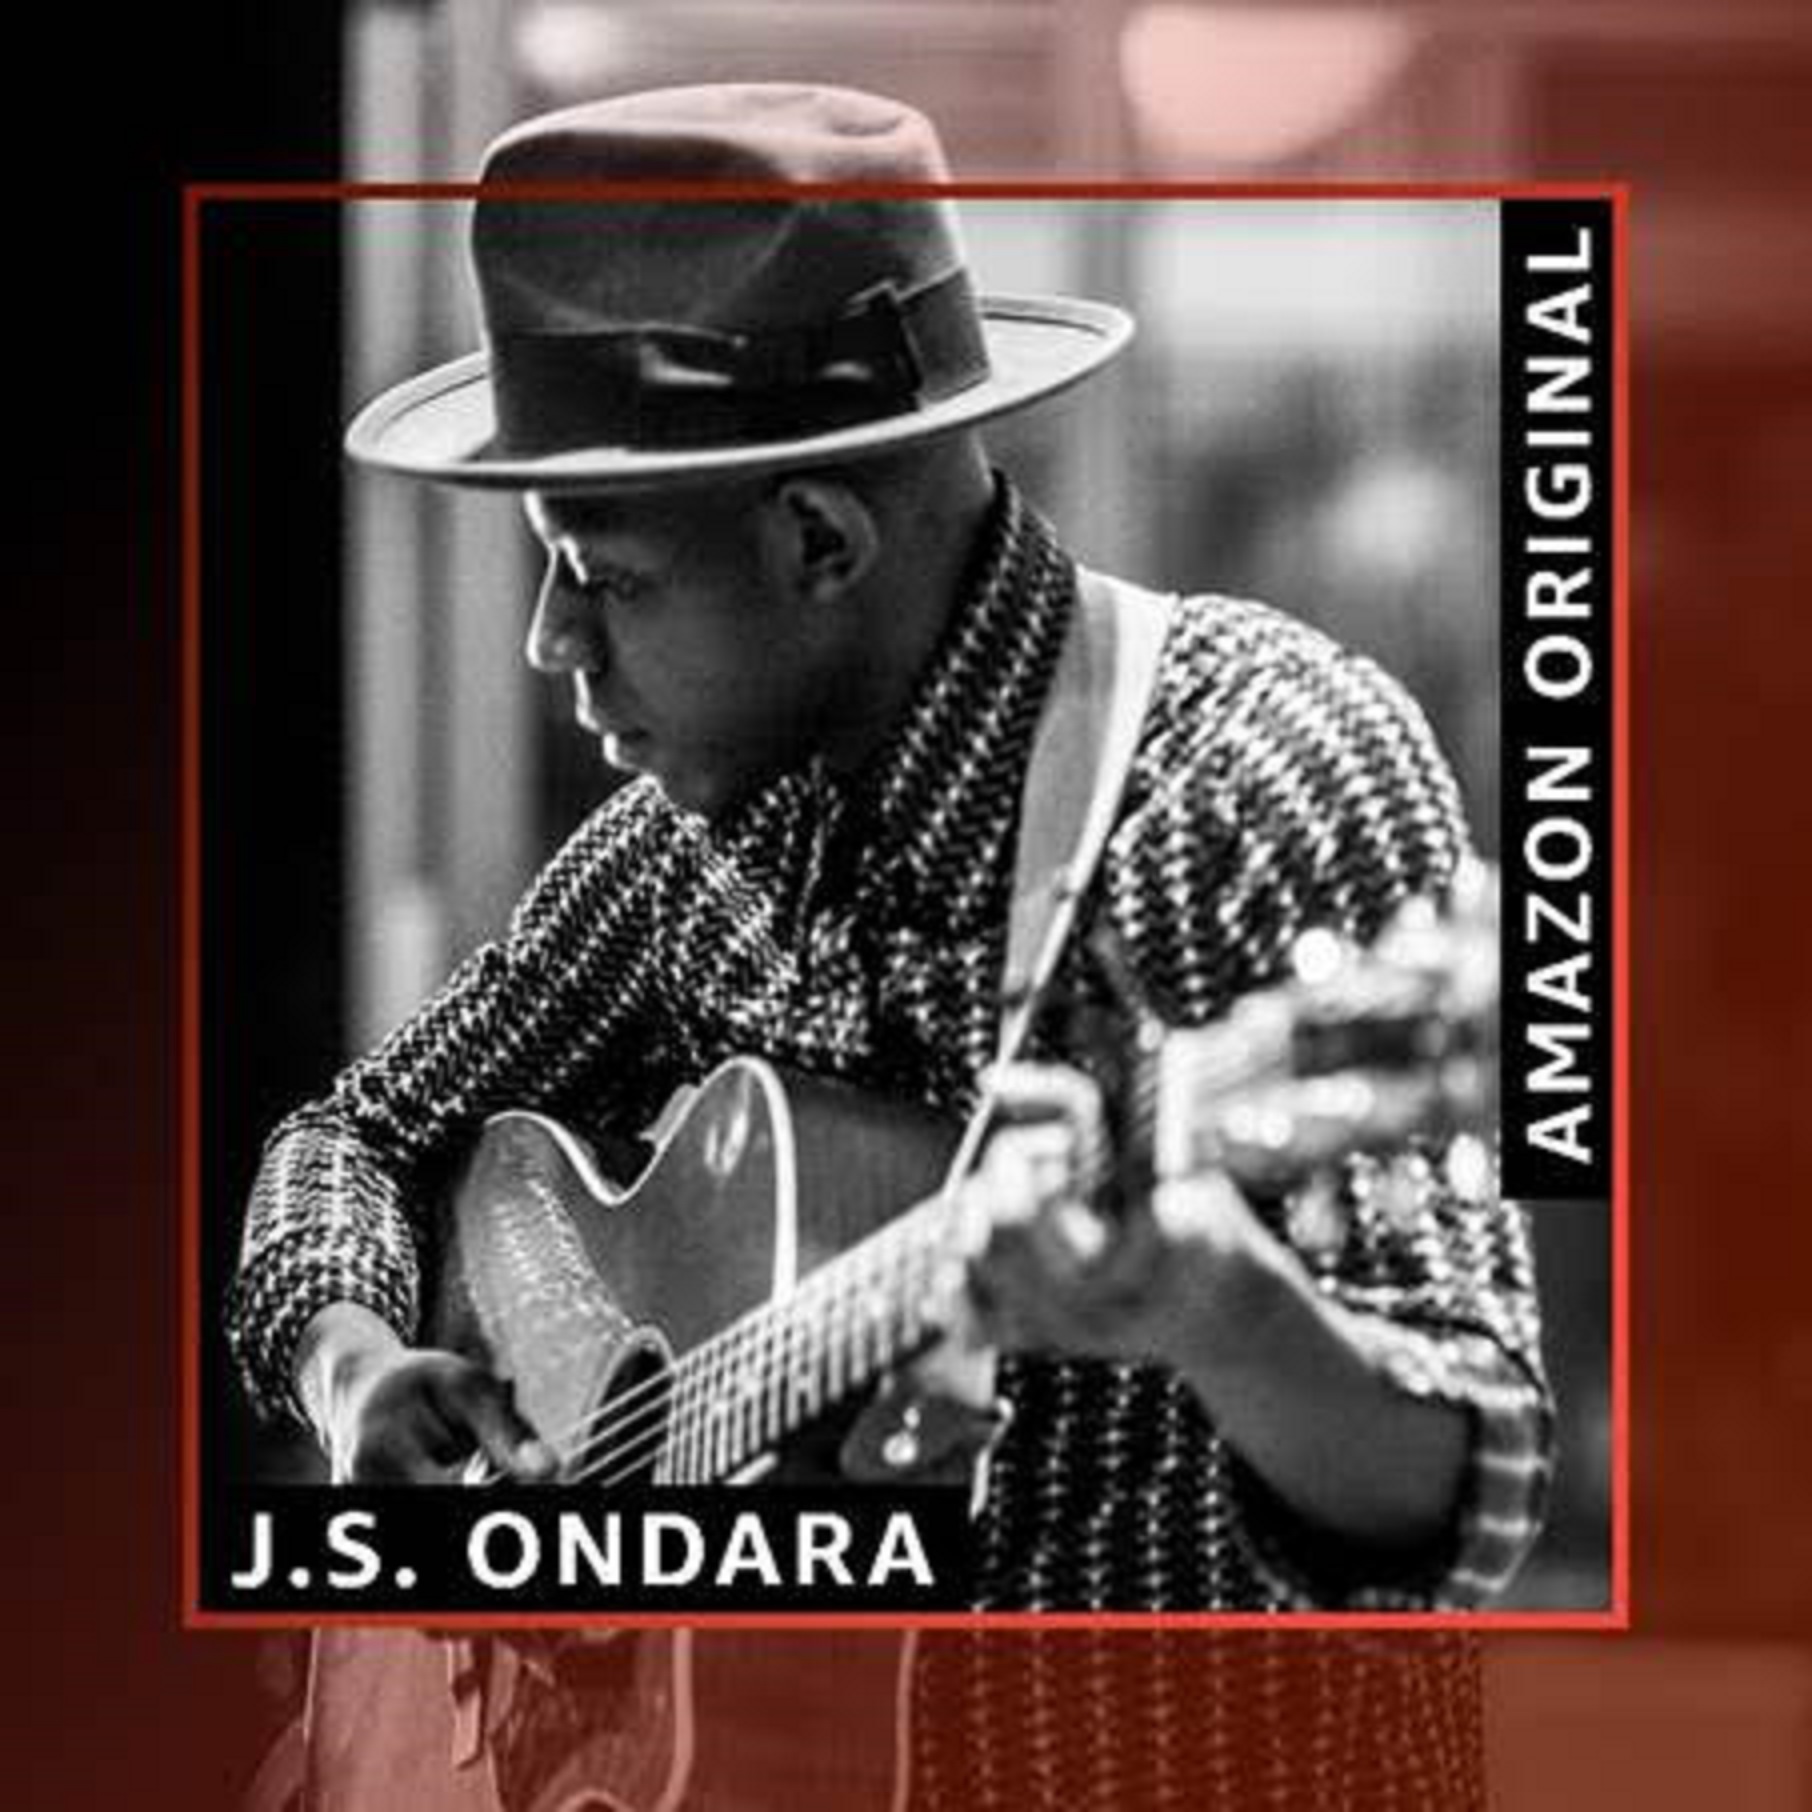 J.S. Ondara Releases a Cover of Neil Young’s “Heart of Gold”